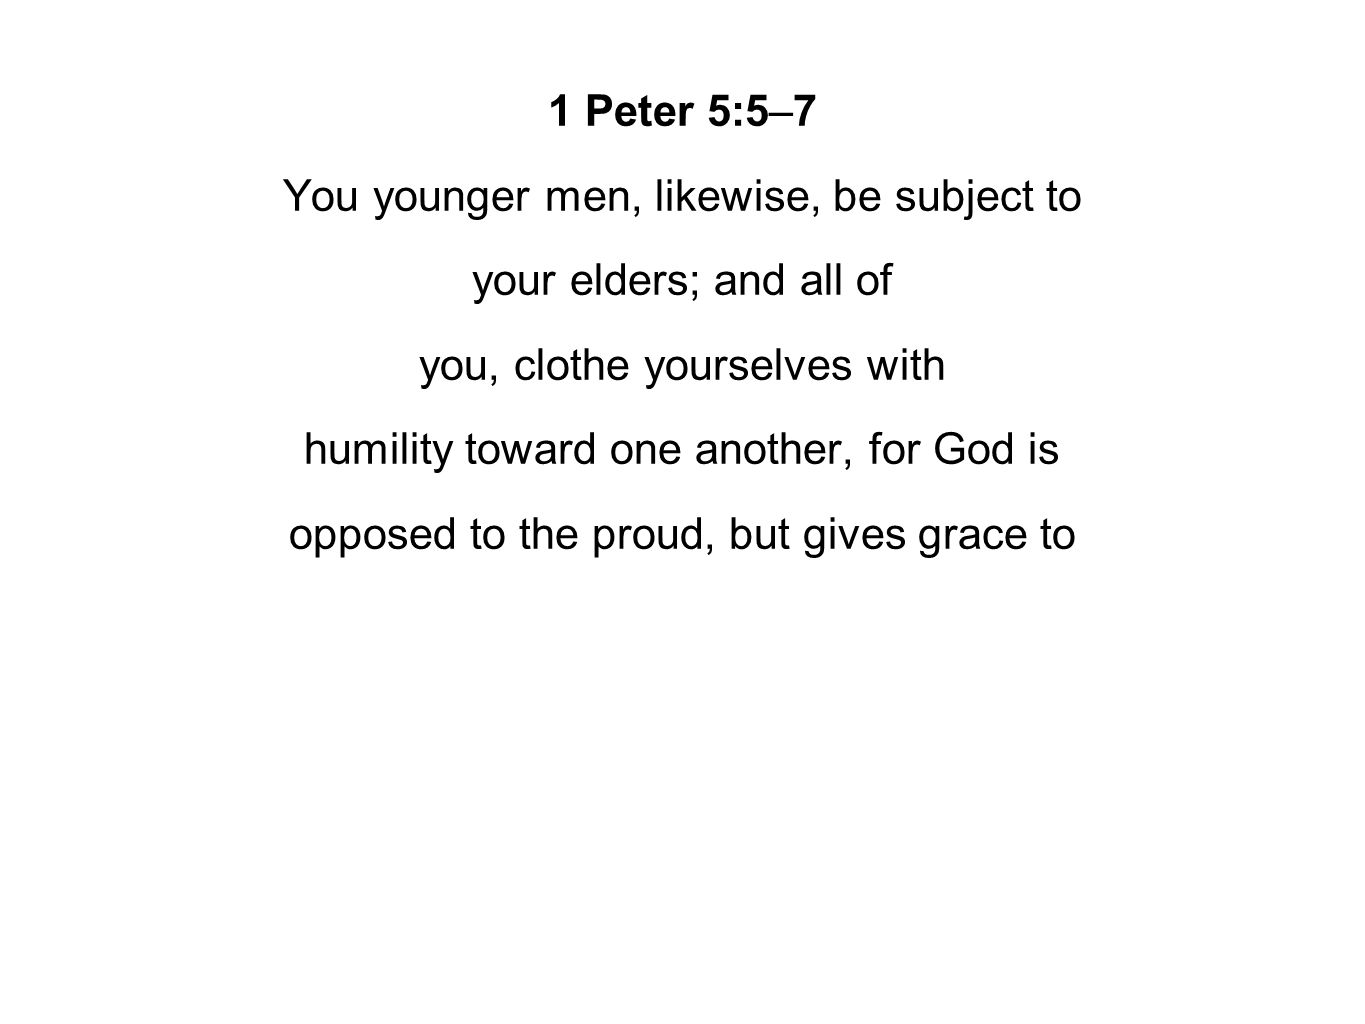 1 Peter 5:5–7 You younger men, likewise, be subject to your elders; and all of you, clothe yourselves with humility toward one another, for God is opposed to the proud, but gives grace to